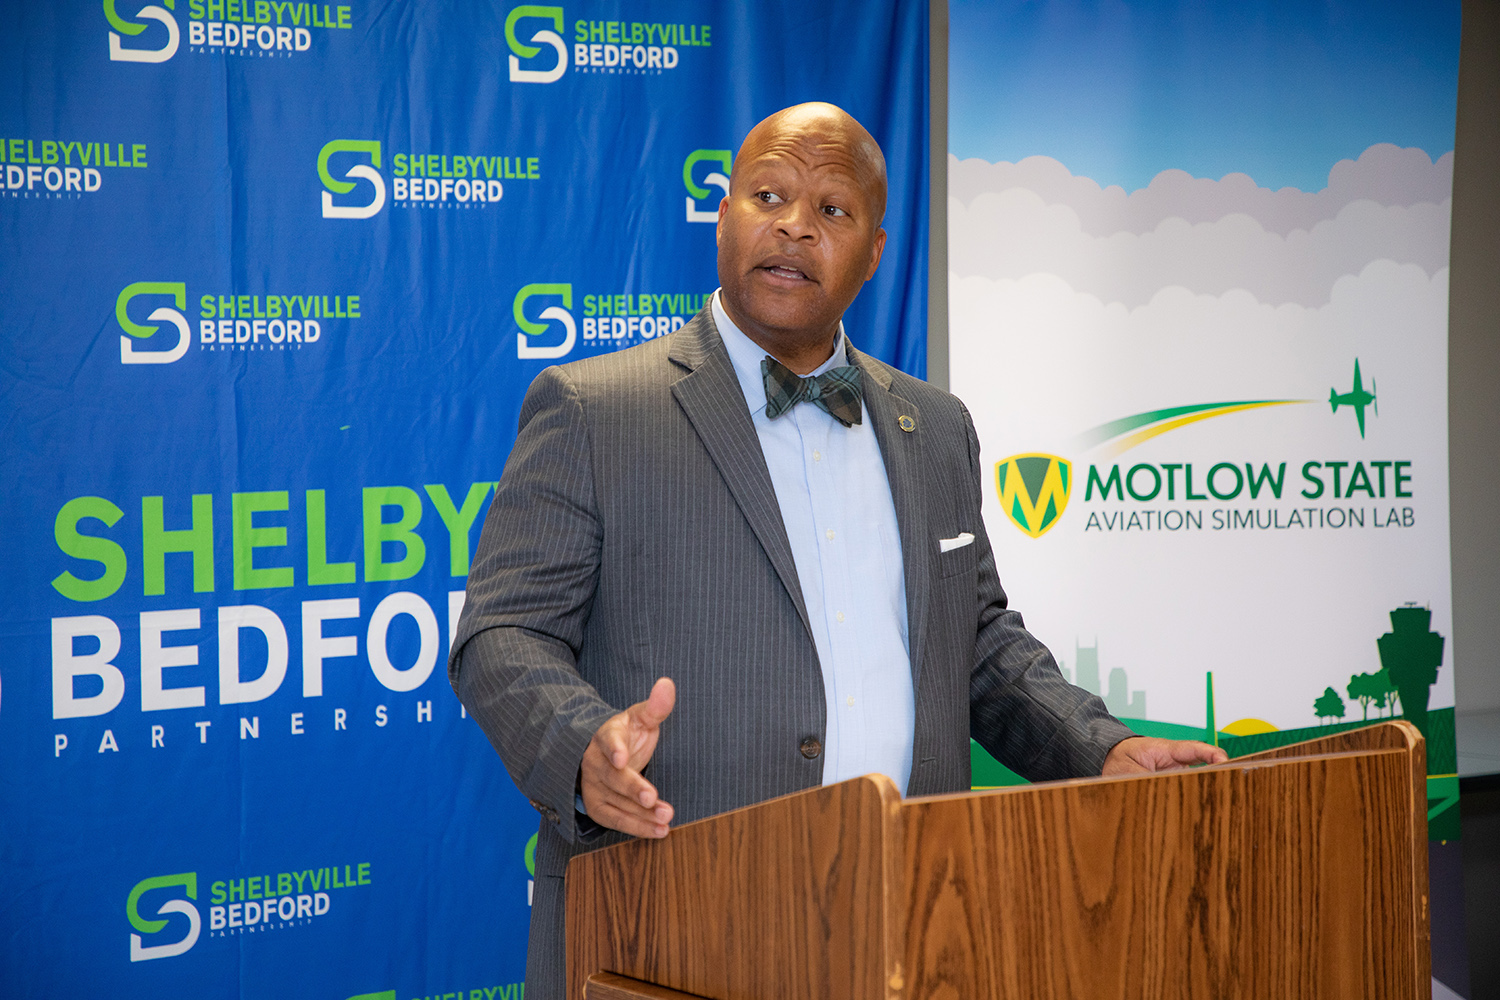 Dr. Michael Torrence, Motlow President, speaking at ribbon cutting event.